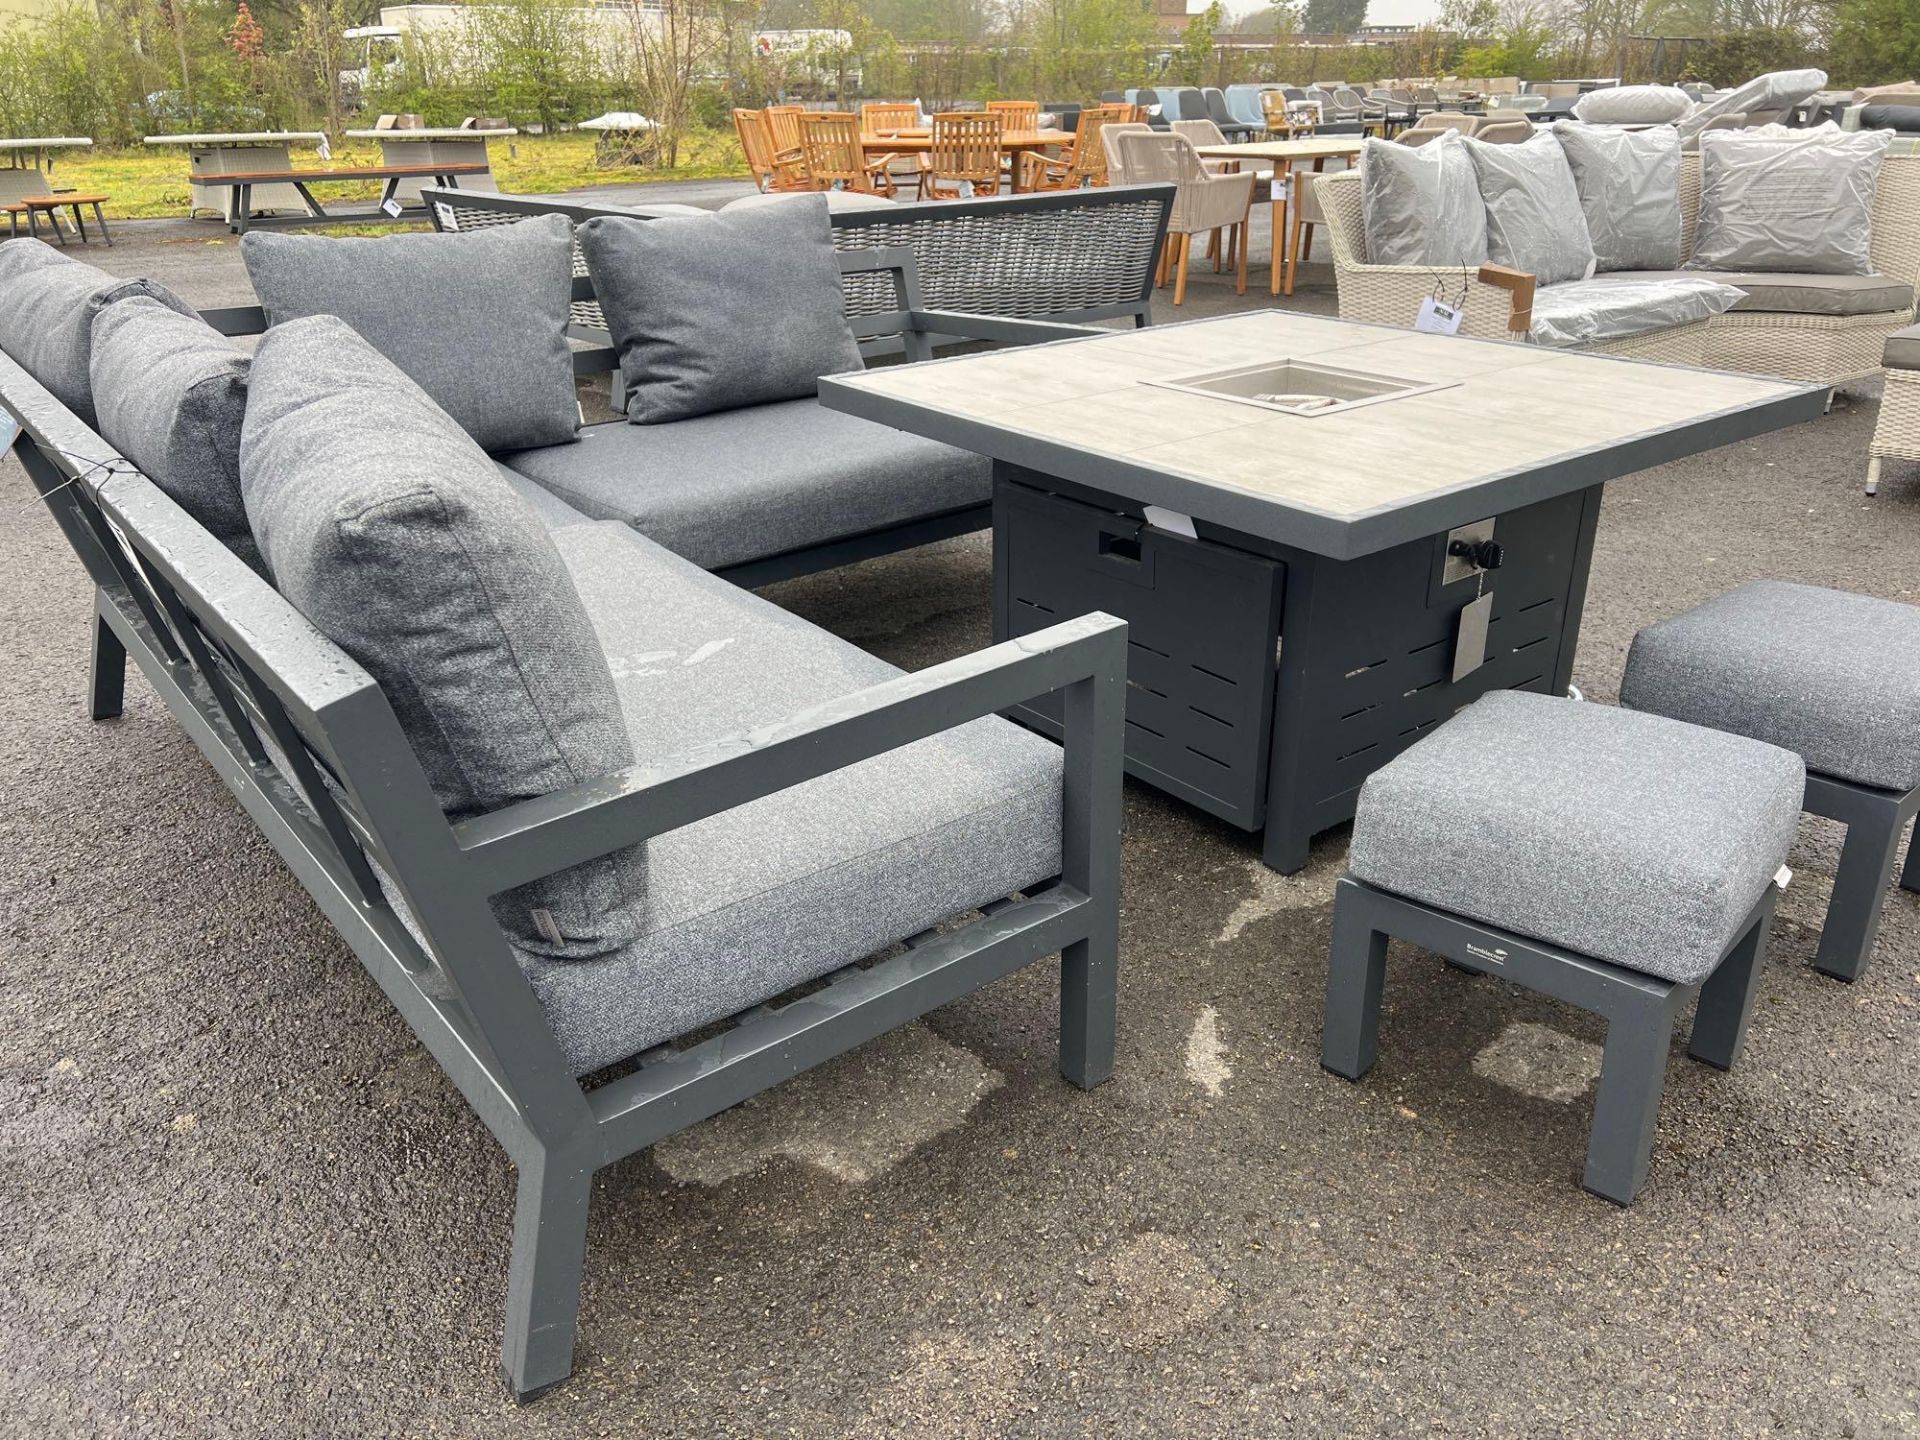 A106 Rochelle Mini Modular Sofa with Square Firepit Table and 2 x Stools - Image 2 of 4